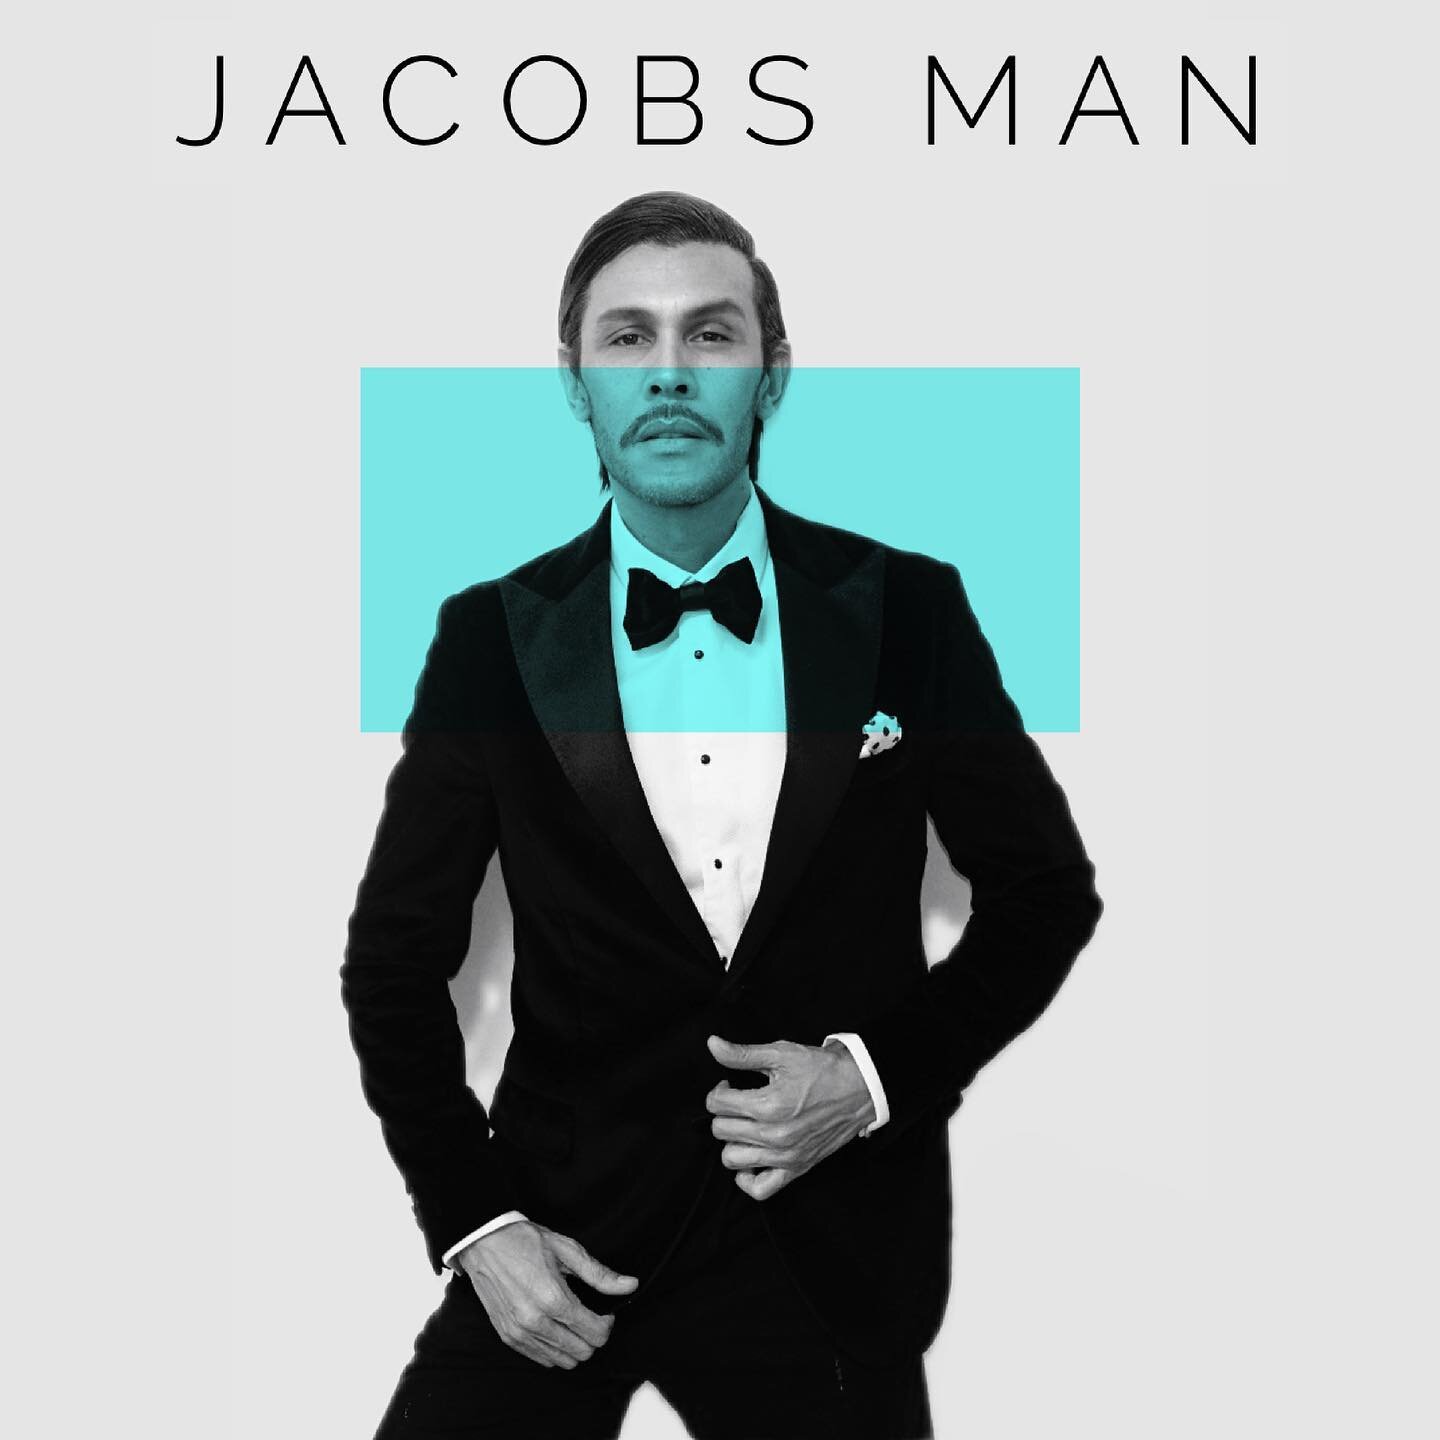 Here&rsquo;s to your best-dressed year!
Please subscribe to Jacobsman.com for the latest style &amp; grooming trends. 

#jacobsman #style #menswear #fashion